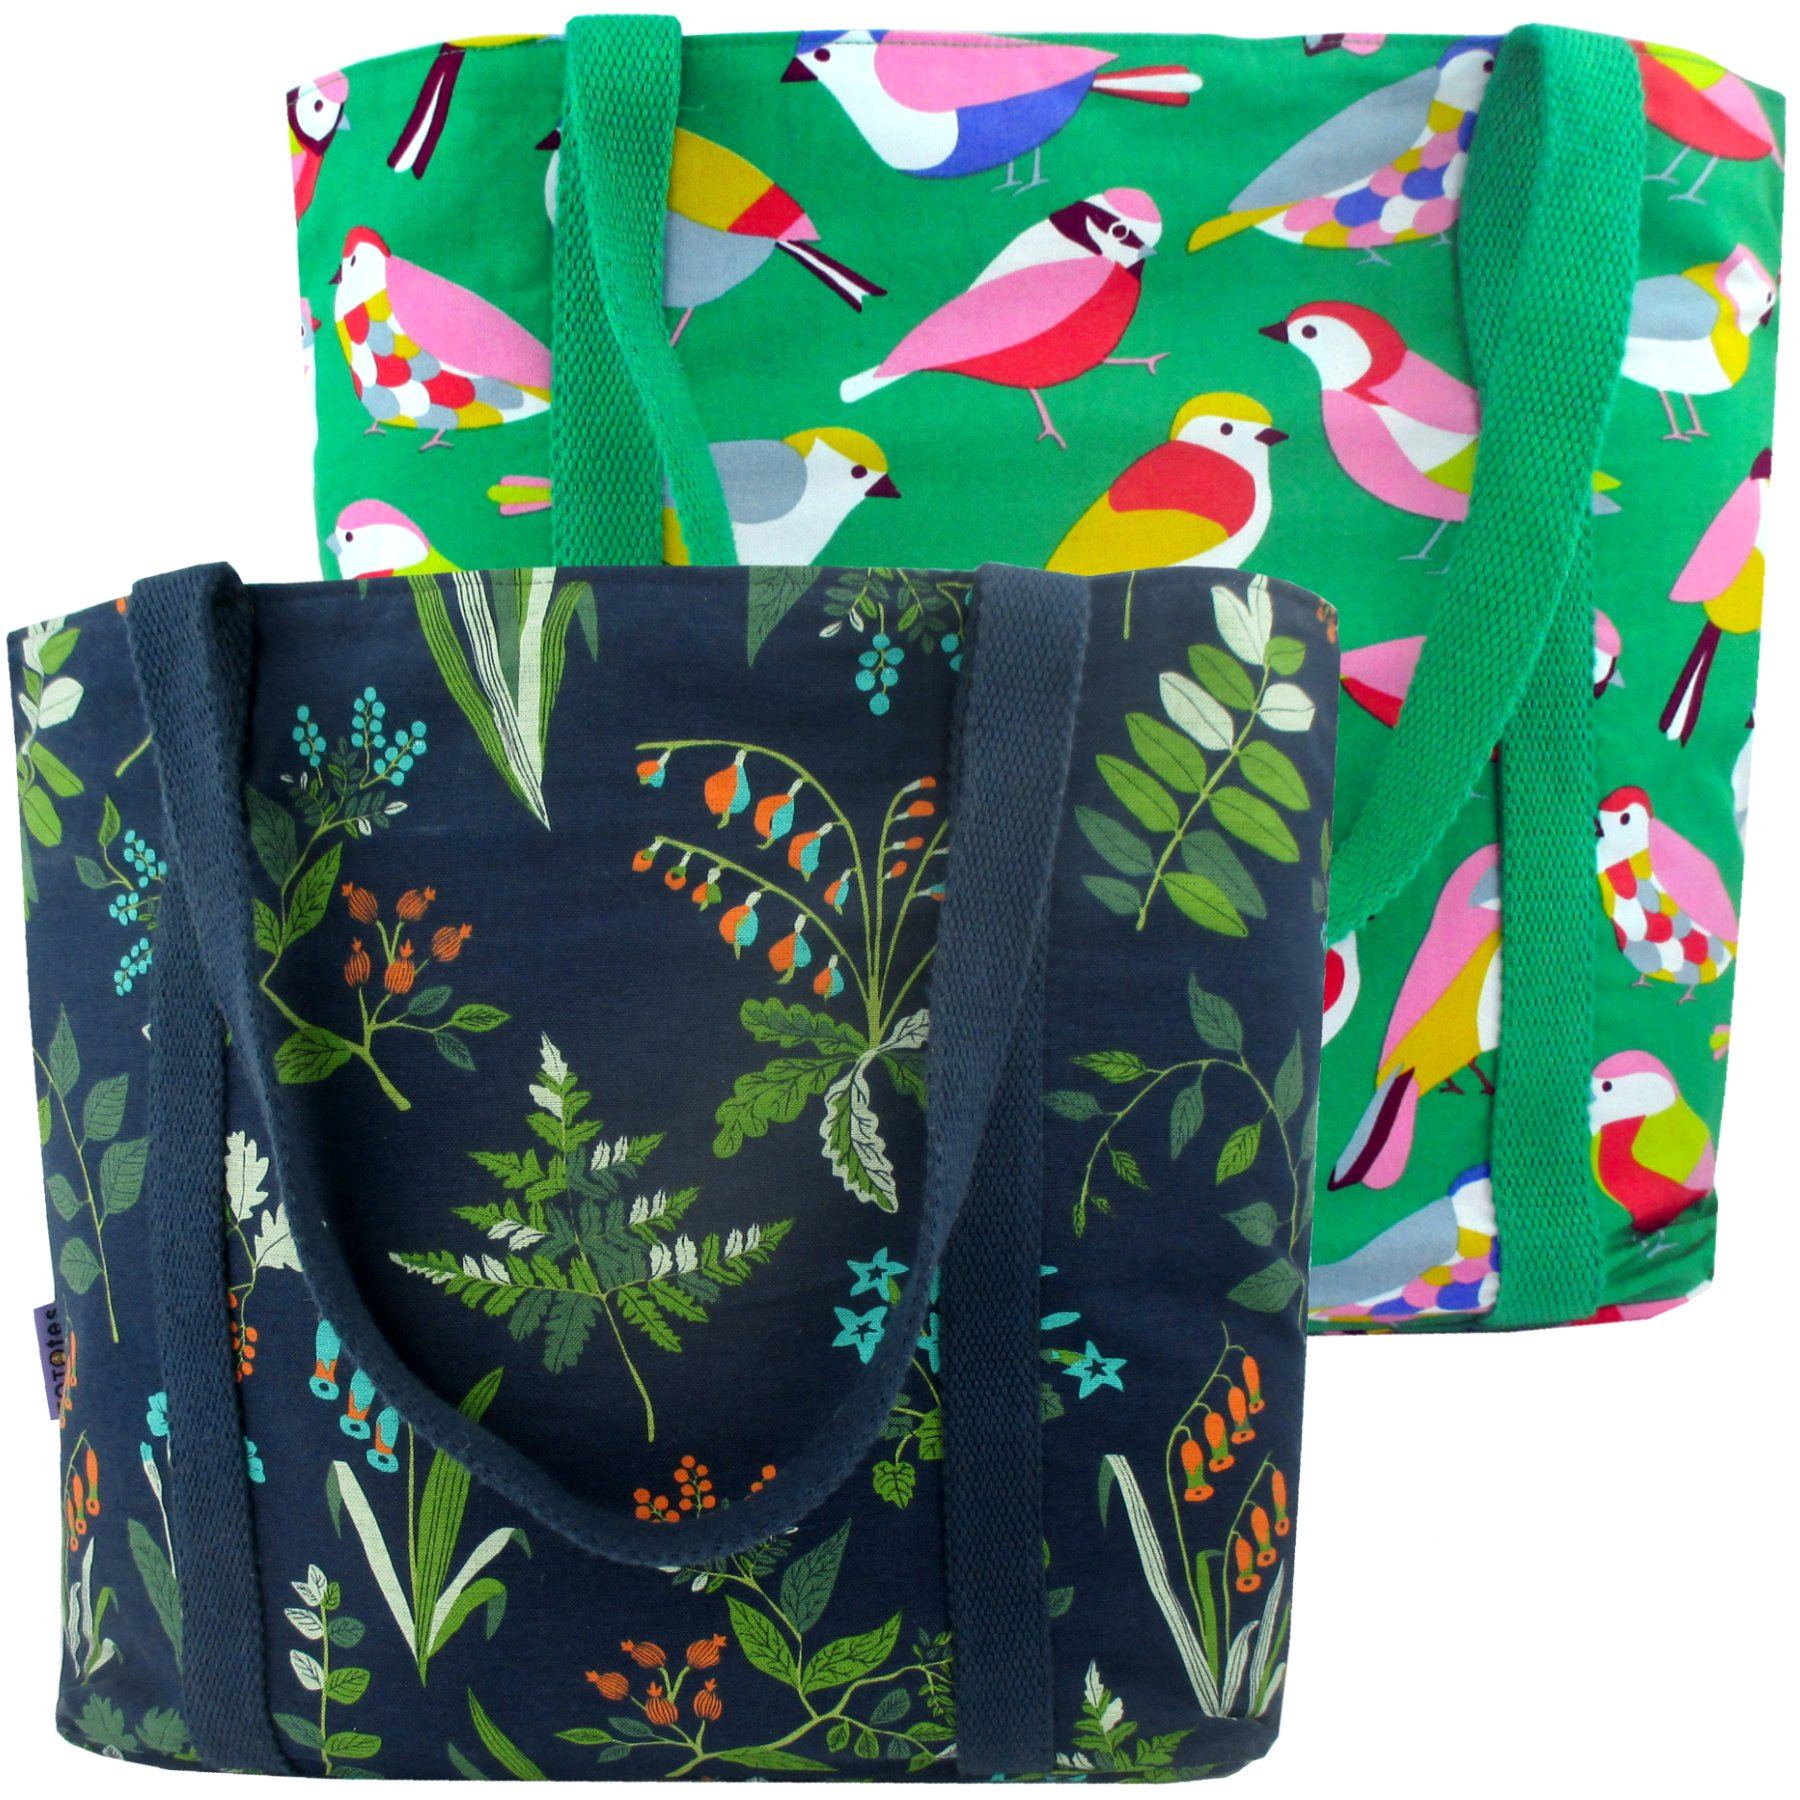 Colorful Green Bird Floral Leaves Nature Print Large Carry-All Shoulder Tote Bags Pack of 2